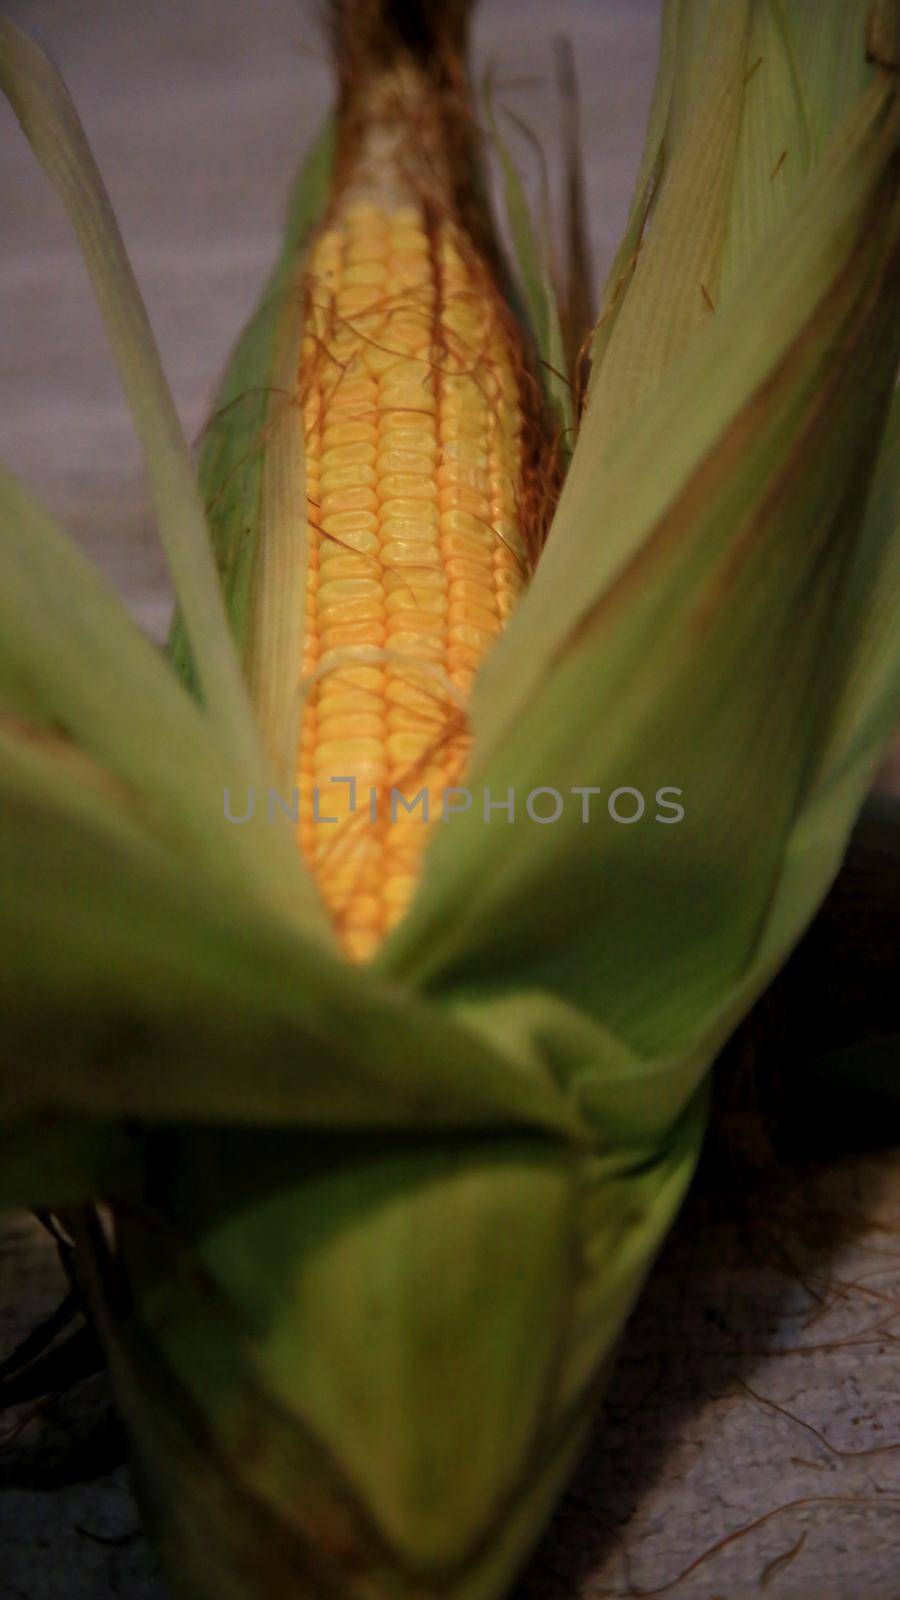 salvador, bahia / brazil - may 9, 2020: ear of corn is seen in the city of Salvador.